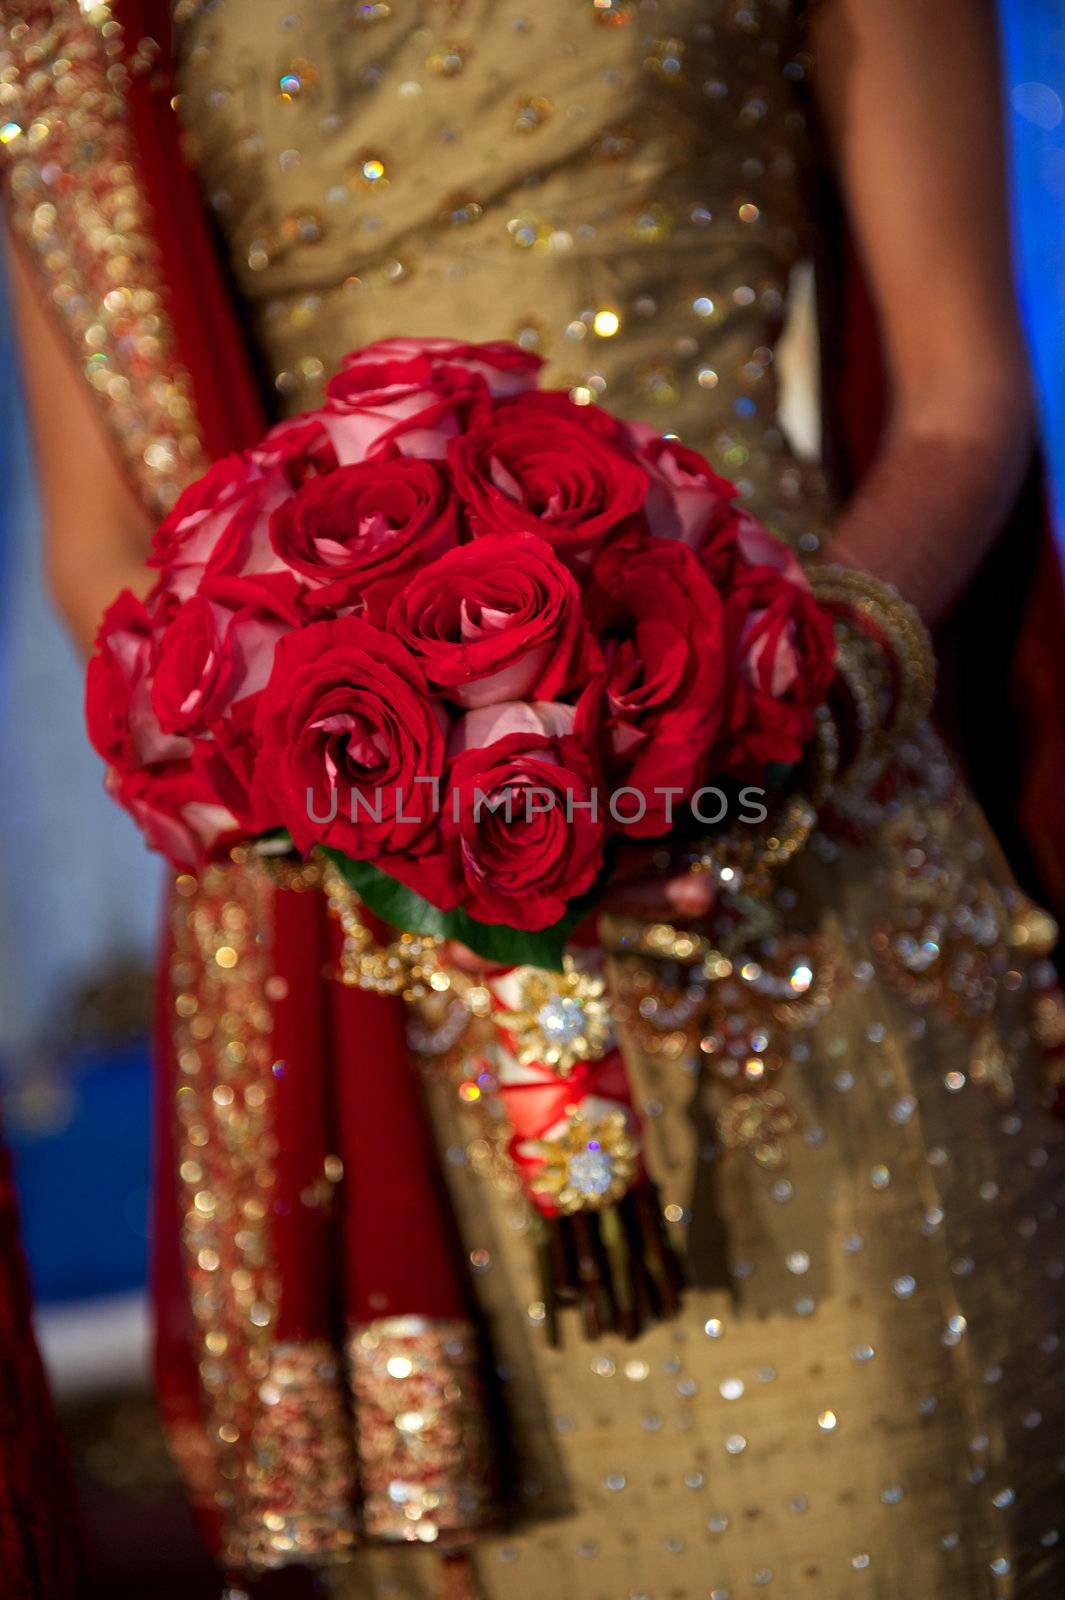 Image of a beautiful Indian bride's bouquet by gregory21